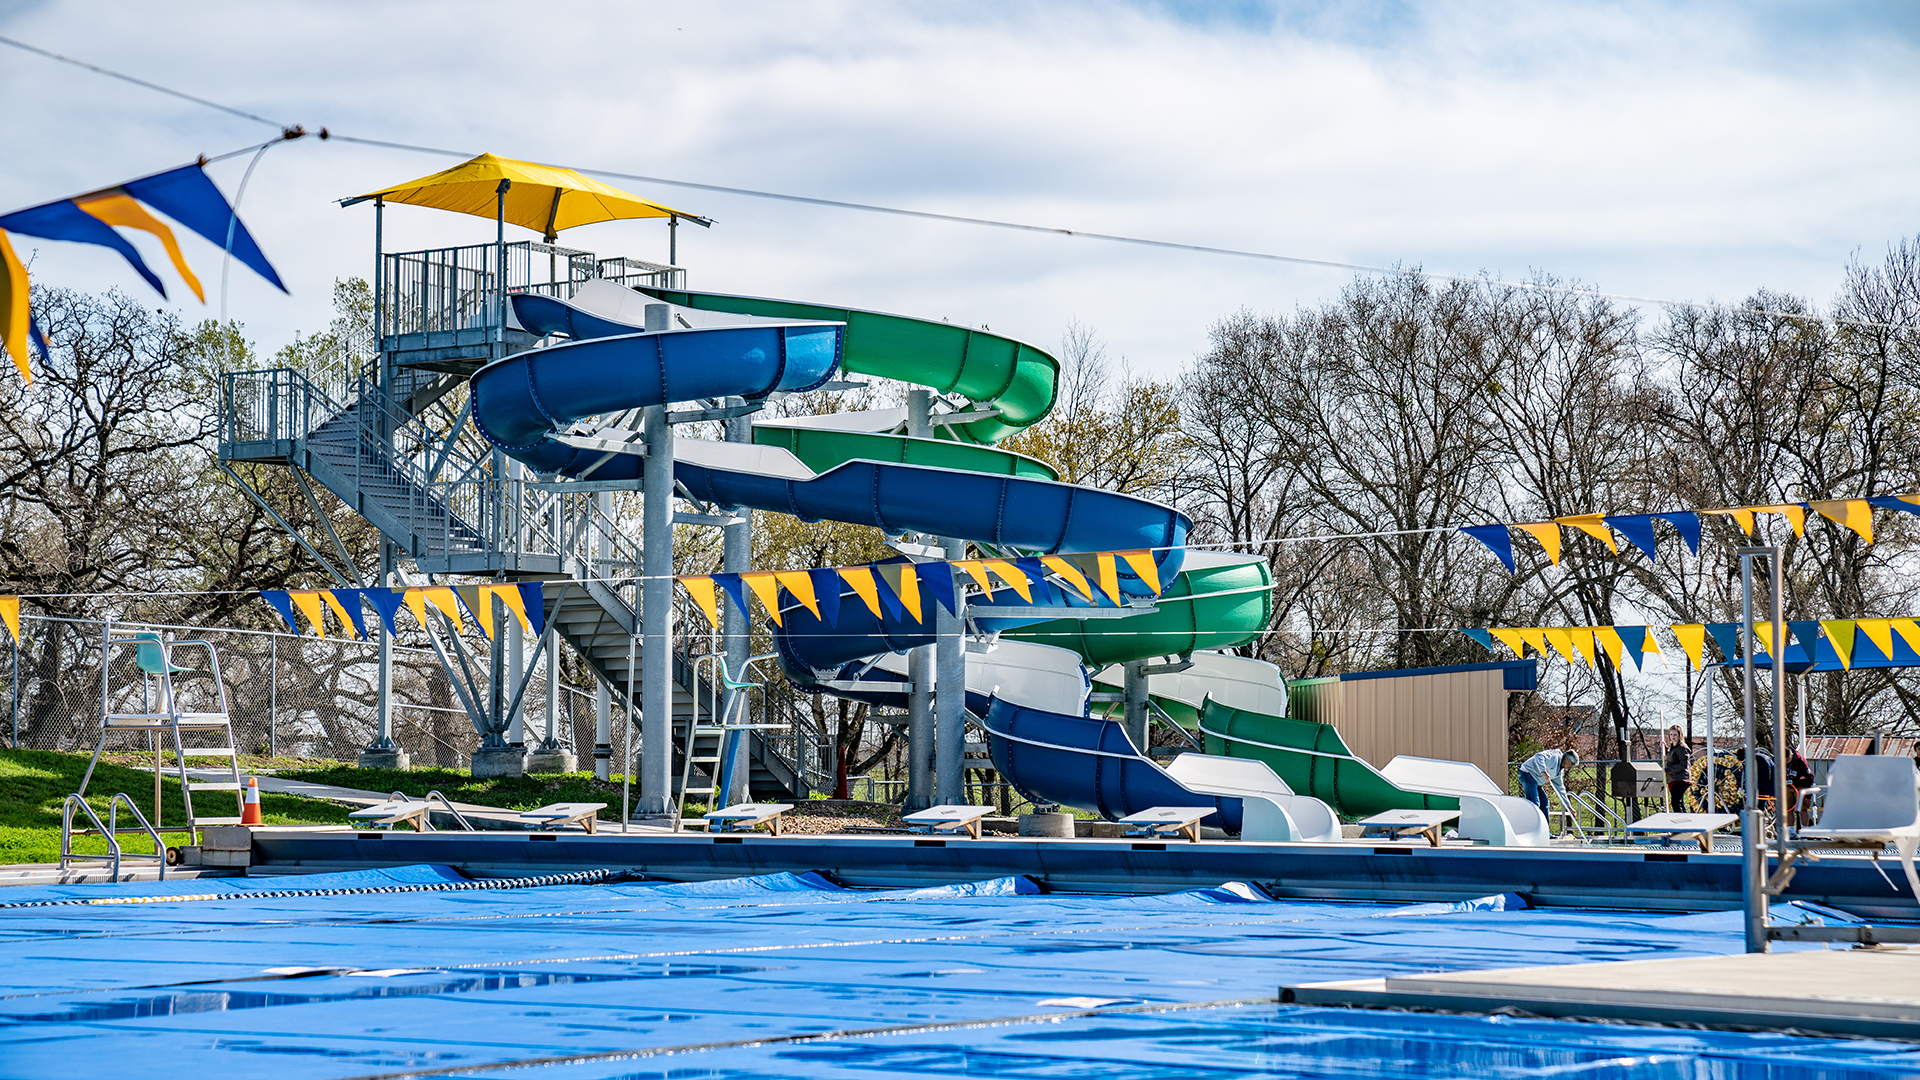 Photo of the water slides at the Bryan Aquatic Center